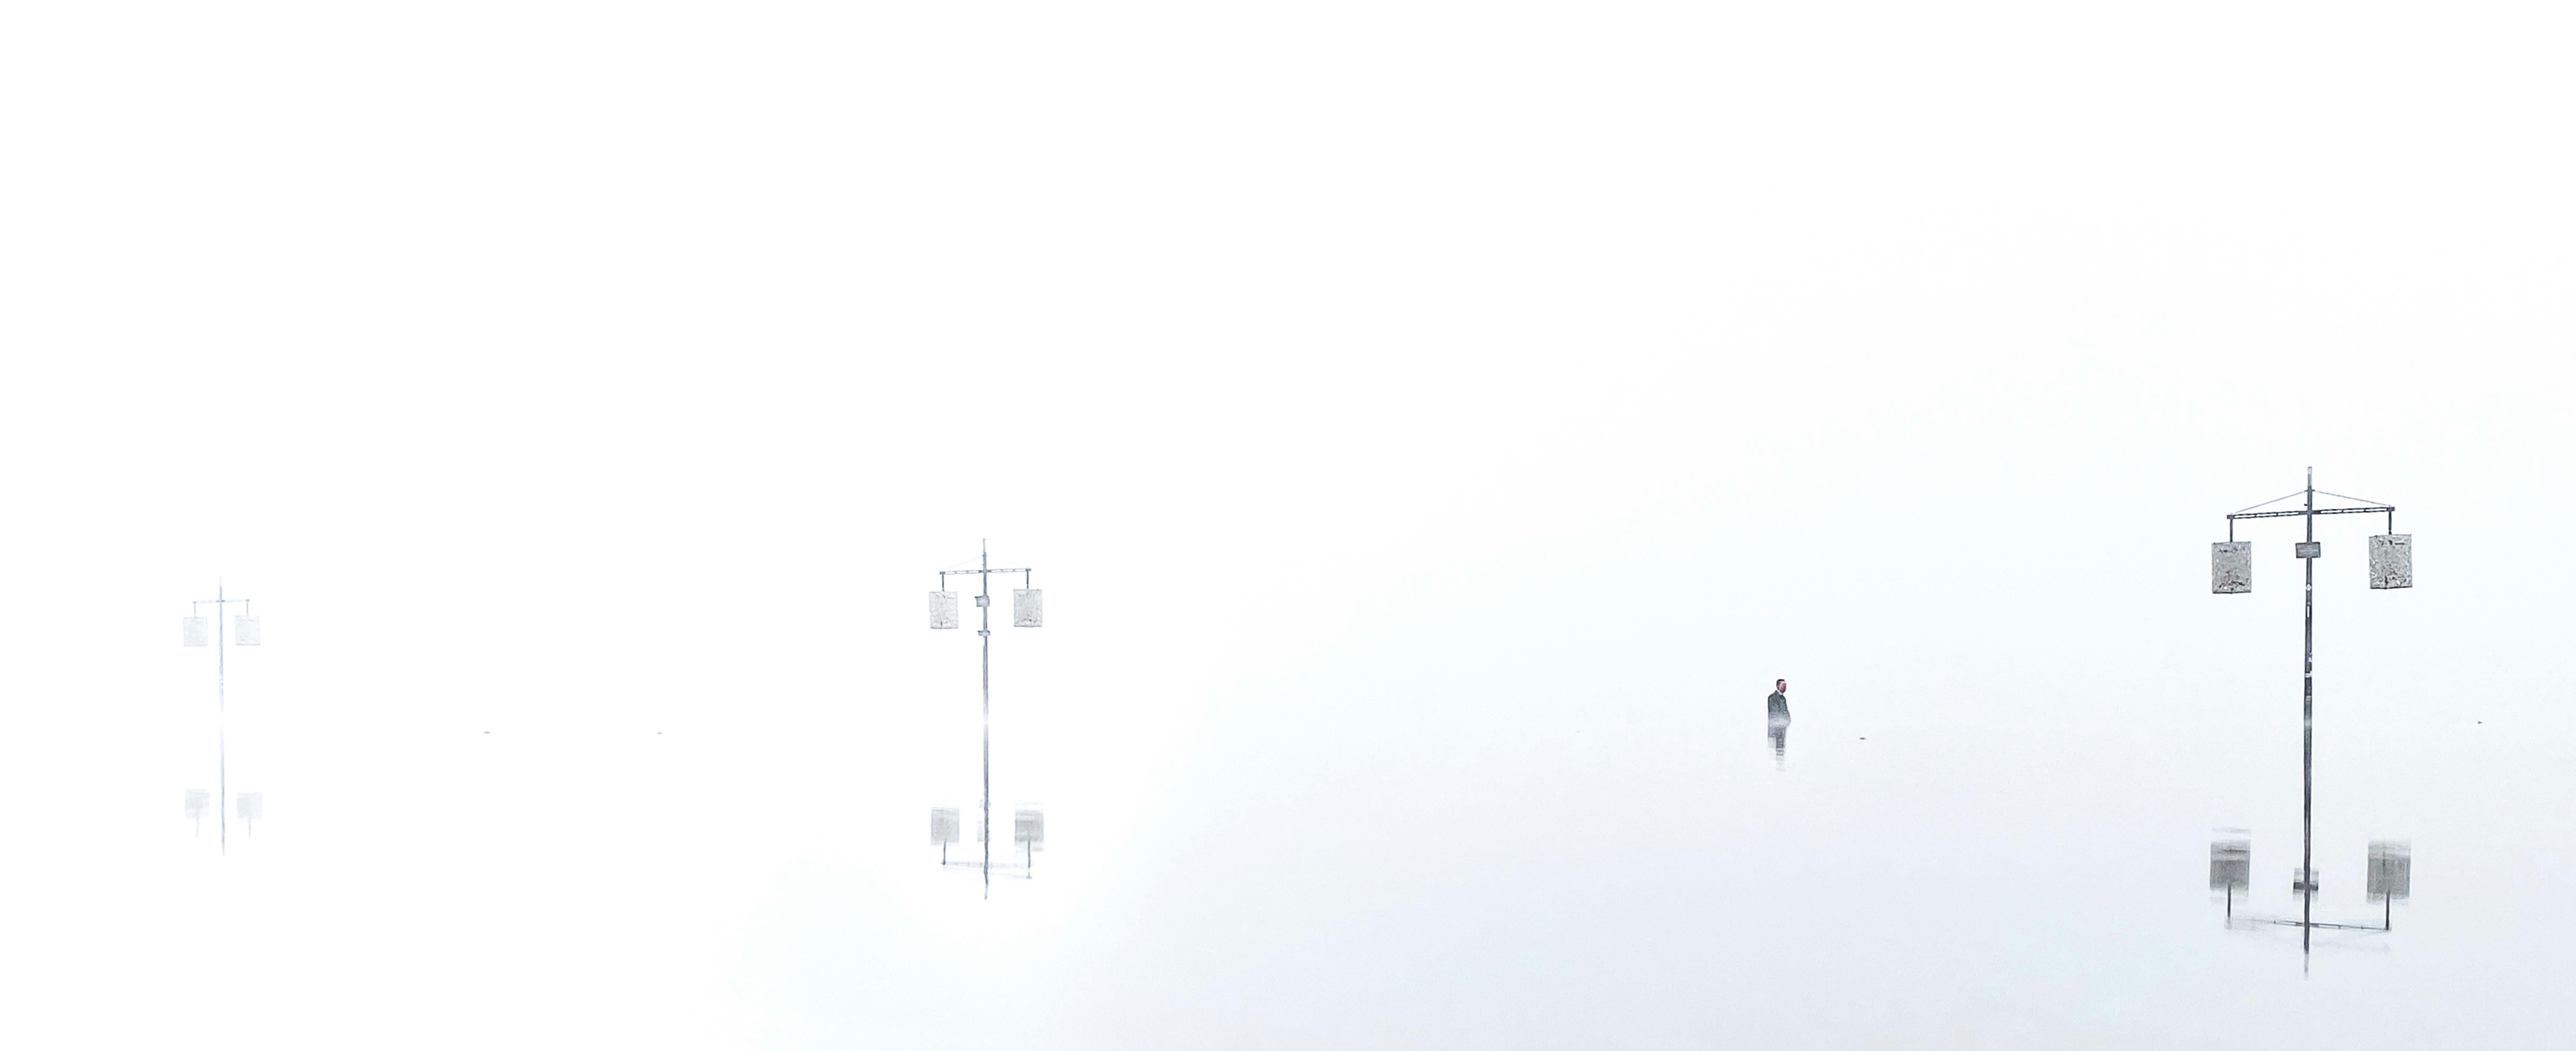 lonely,fog,mist,loneliness,mystery,memories,memoire,rêve,flou,blur,Bordeaux,France,silhouette,dreams,minimal,minimalist,white,blurry,mind,thinking,suit,man,suitup,morning,foggy,oniric,dreamy,sadness,sad,paradise,white,city,early,atmosphere